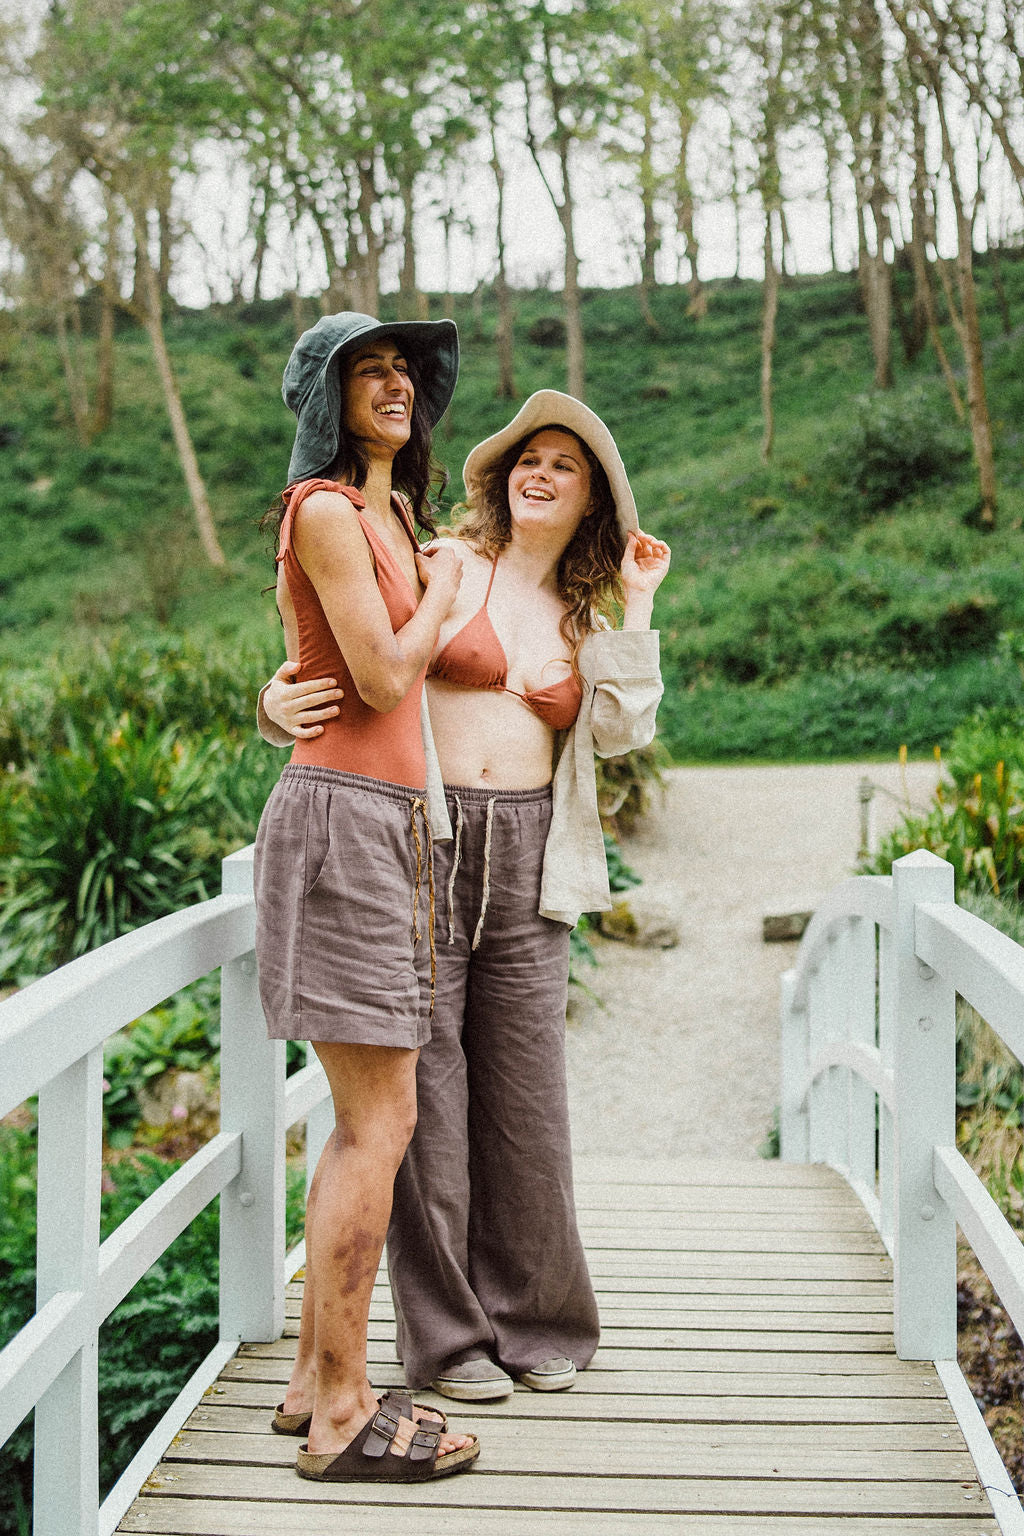 Solpardus laughter on Trebah gardens bridge in Cornwall. Nyx linen hat Thea bamboo onepiece Thea bamboo bikini top Atti linen shorts Atti linen trousers Saba linen shirt. All natural ethical sustainable sunwear swimwear linen clothing perfect for sensitive skin psoriasis and eczema